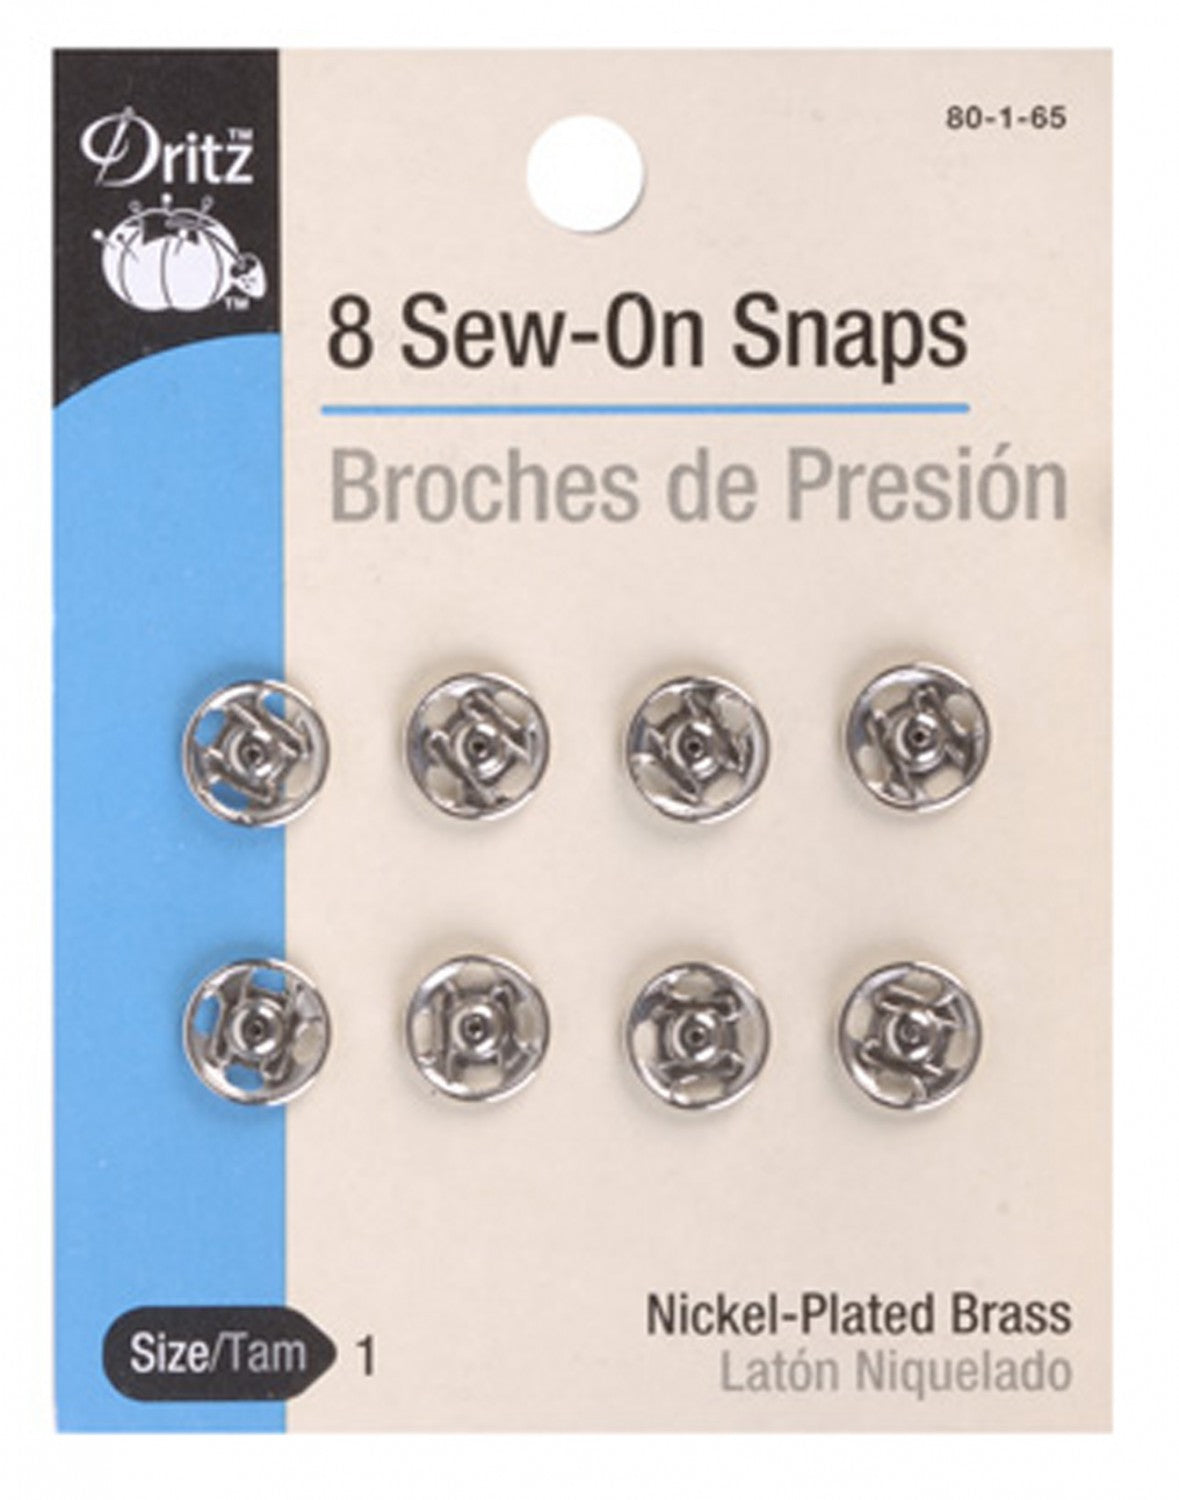 Sew-On Snaps - Size 1